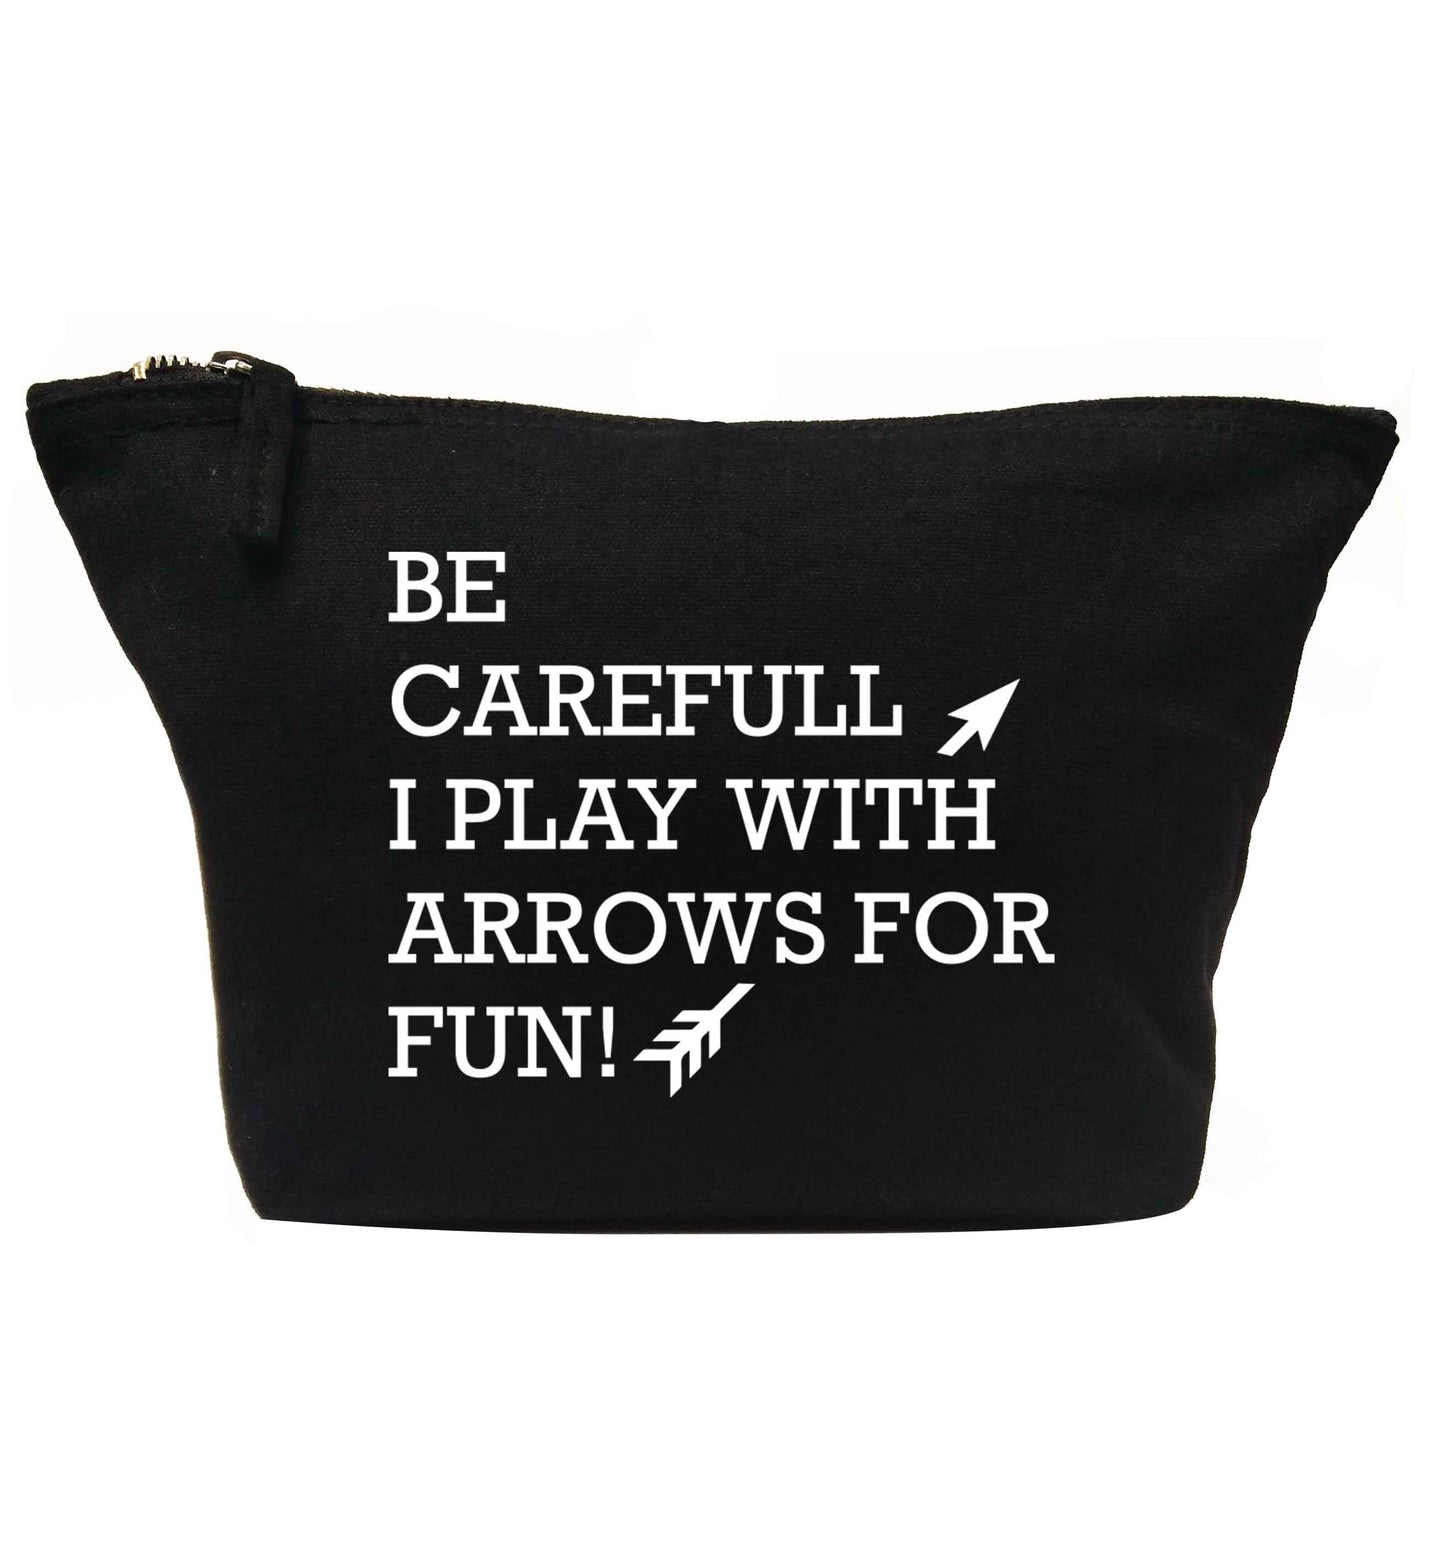 Be carefull I play with arrows for fun | makeup / wash bag